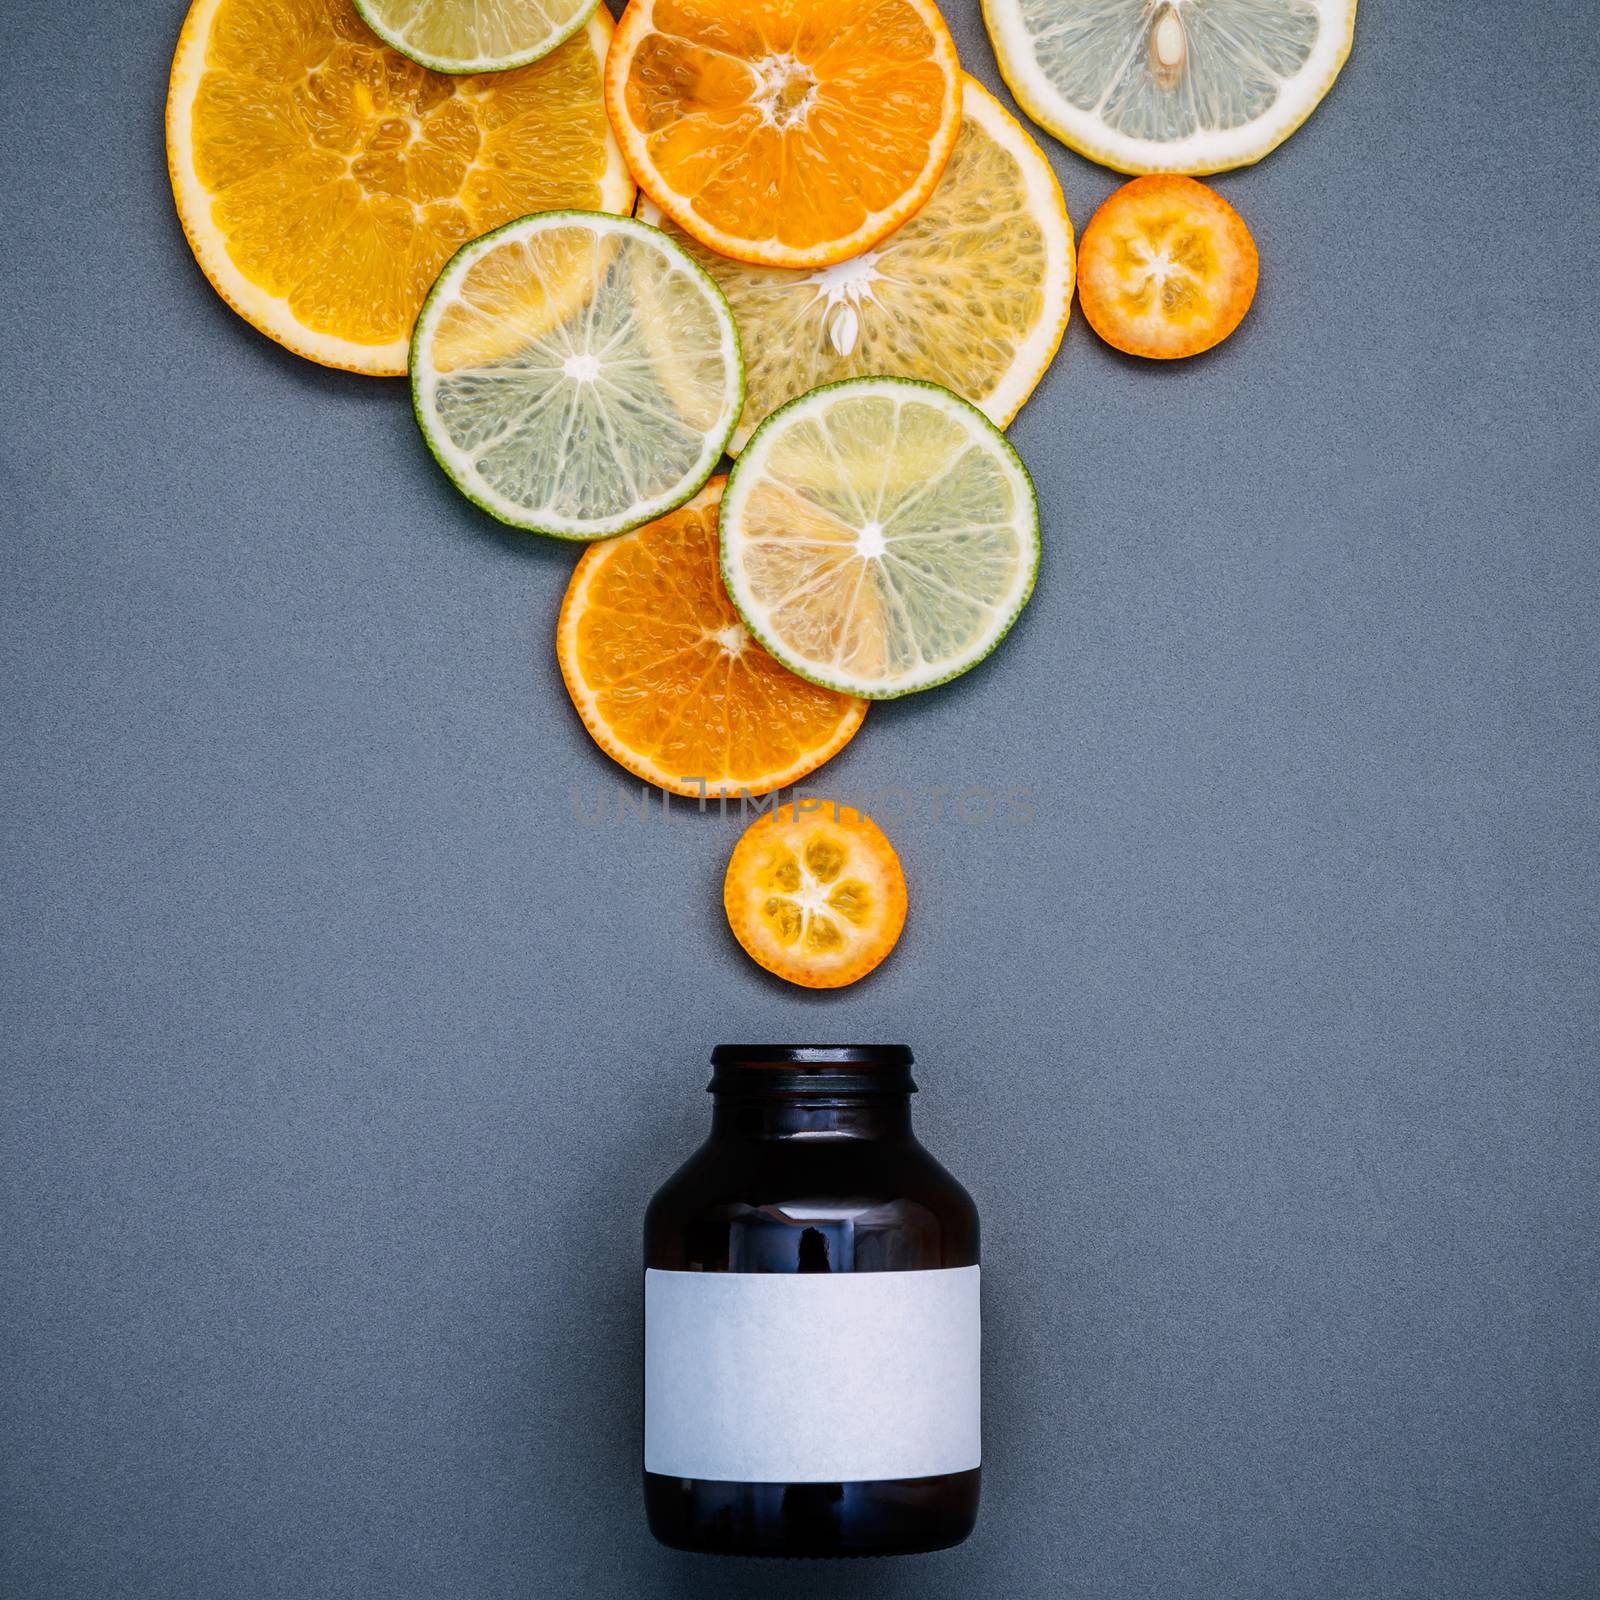 Healthy foods and medicine concept. Bottle of vitamin C and various citrus fruits. Mixed citrus fruits sliced lime,orange and lemon on gray background flat lay.